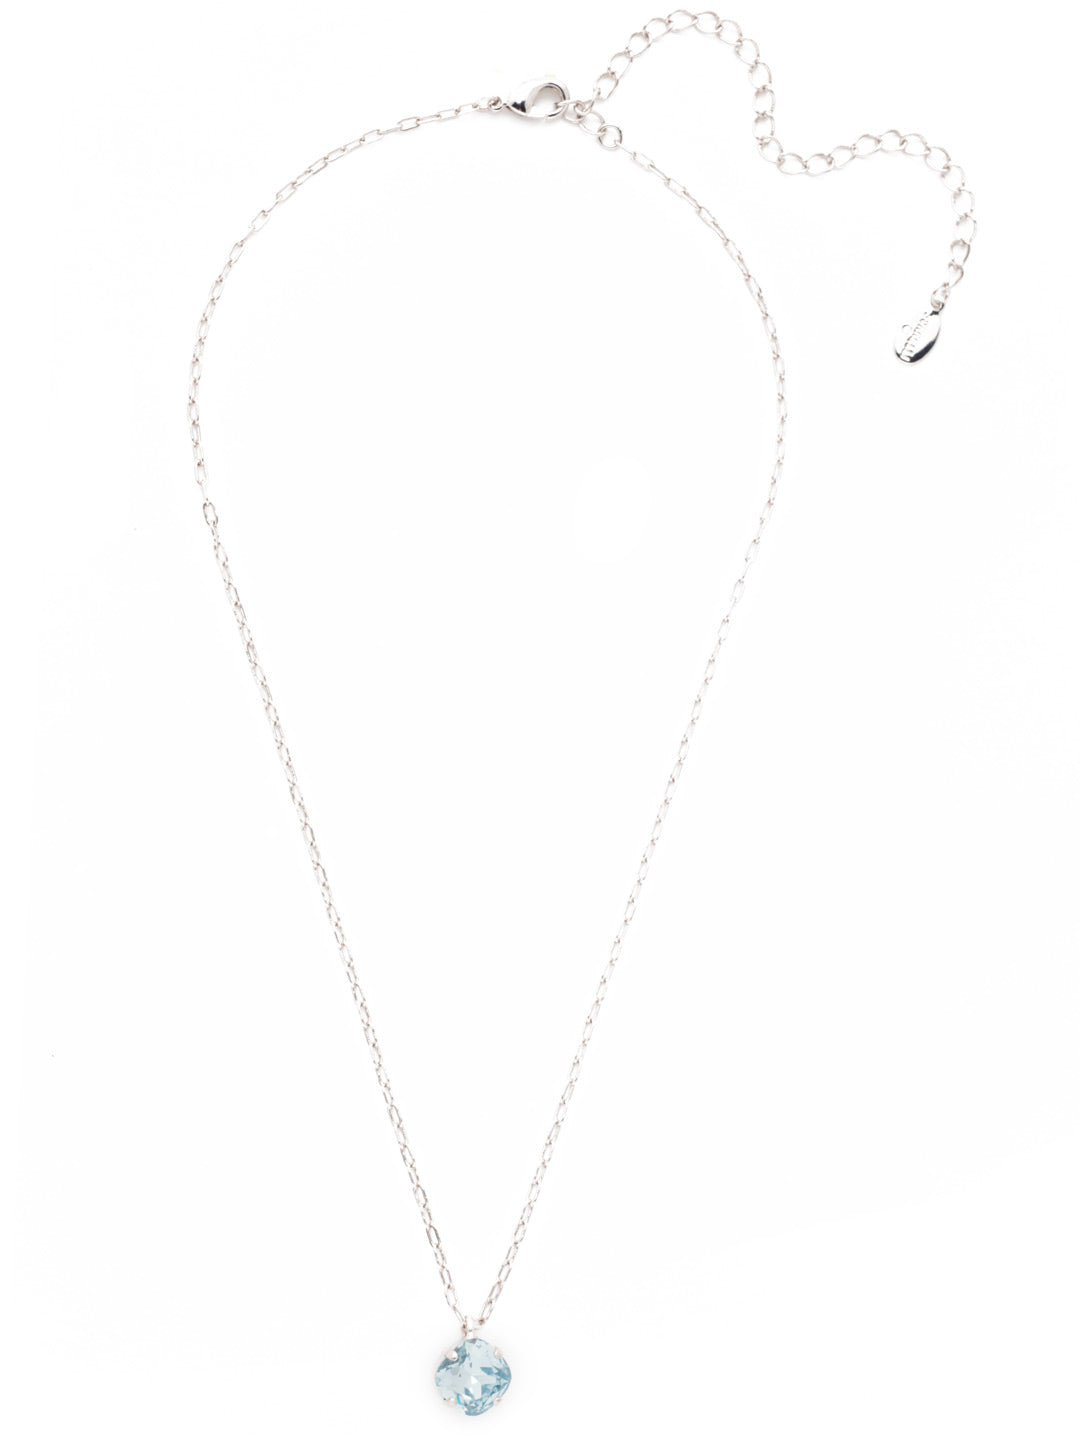 Siren Pendant Necklace - NEP22RHLAQ - With a cushion-cut crystal and delicate chain, the Siren Pendant  will add a litle sparkle to your everyday look. From Sorrelli's Light Aqua collection in our Palladium Silver-tone finish.